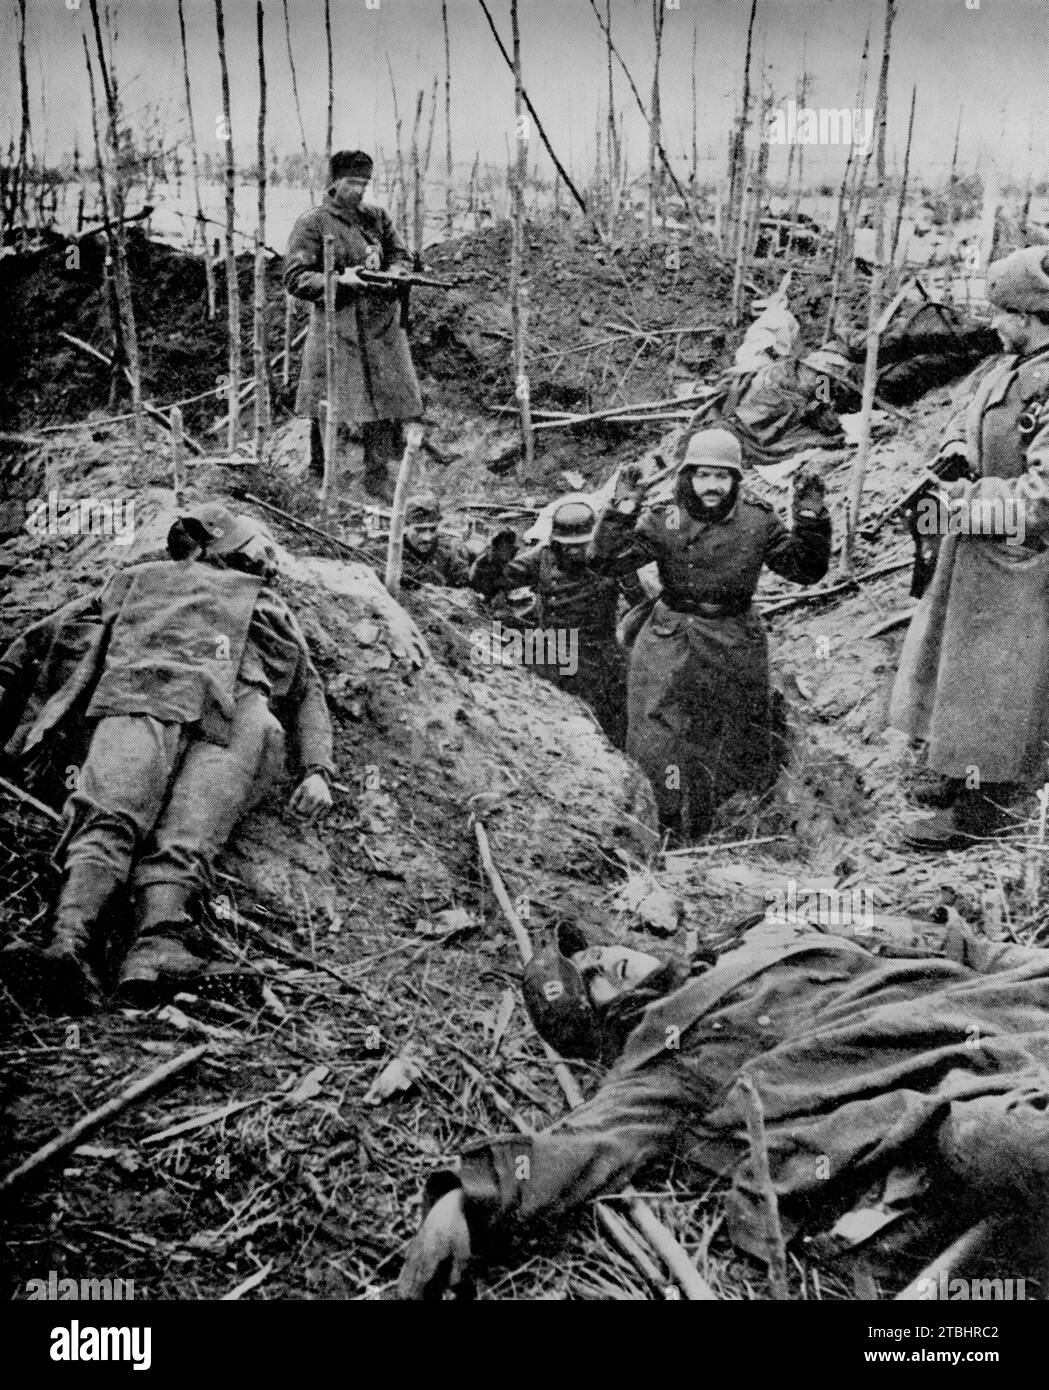 Russian soldiers take Wermacht troops prisoner near Staraya during the German invasion of Russia in April 1942. Promised relief that came too late for the encircled and the now captured invaders fought hard, as can be seen by the bodies of their colleagues lying near the trenches. Stock Photo